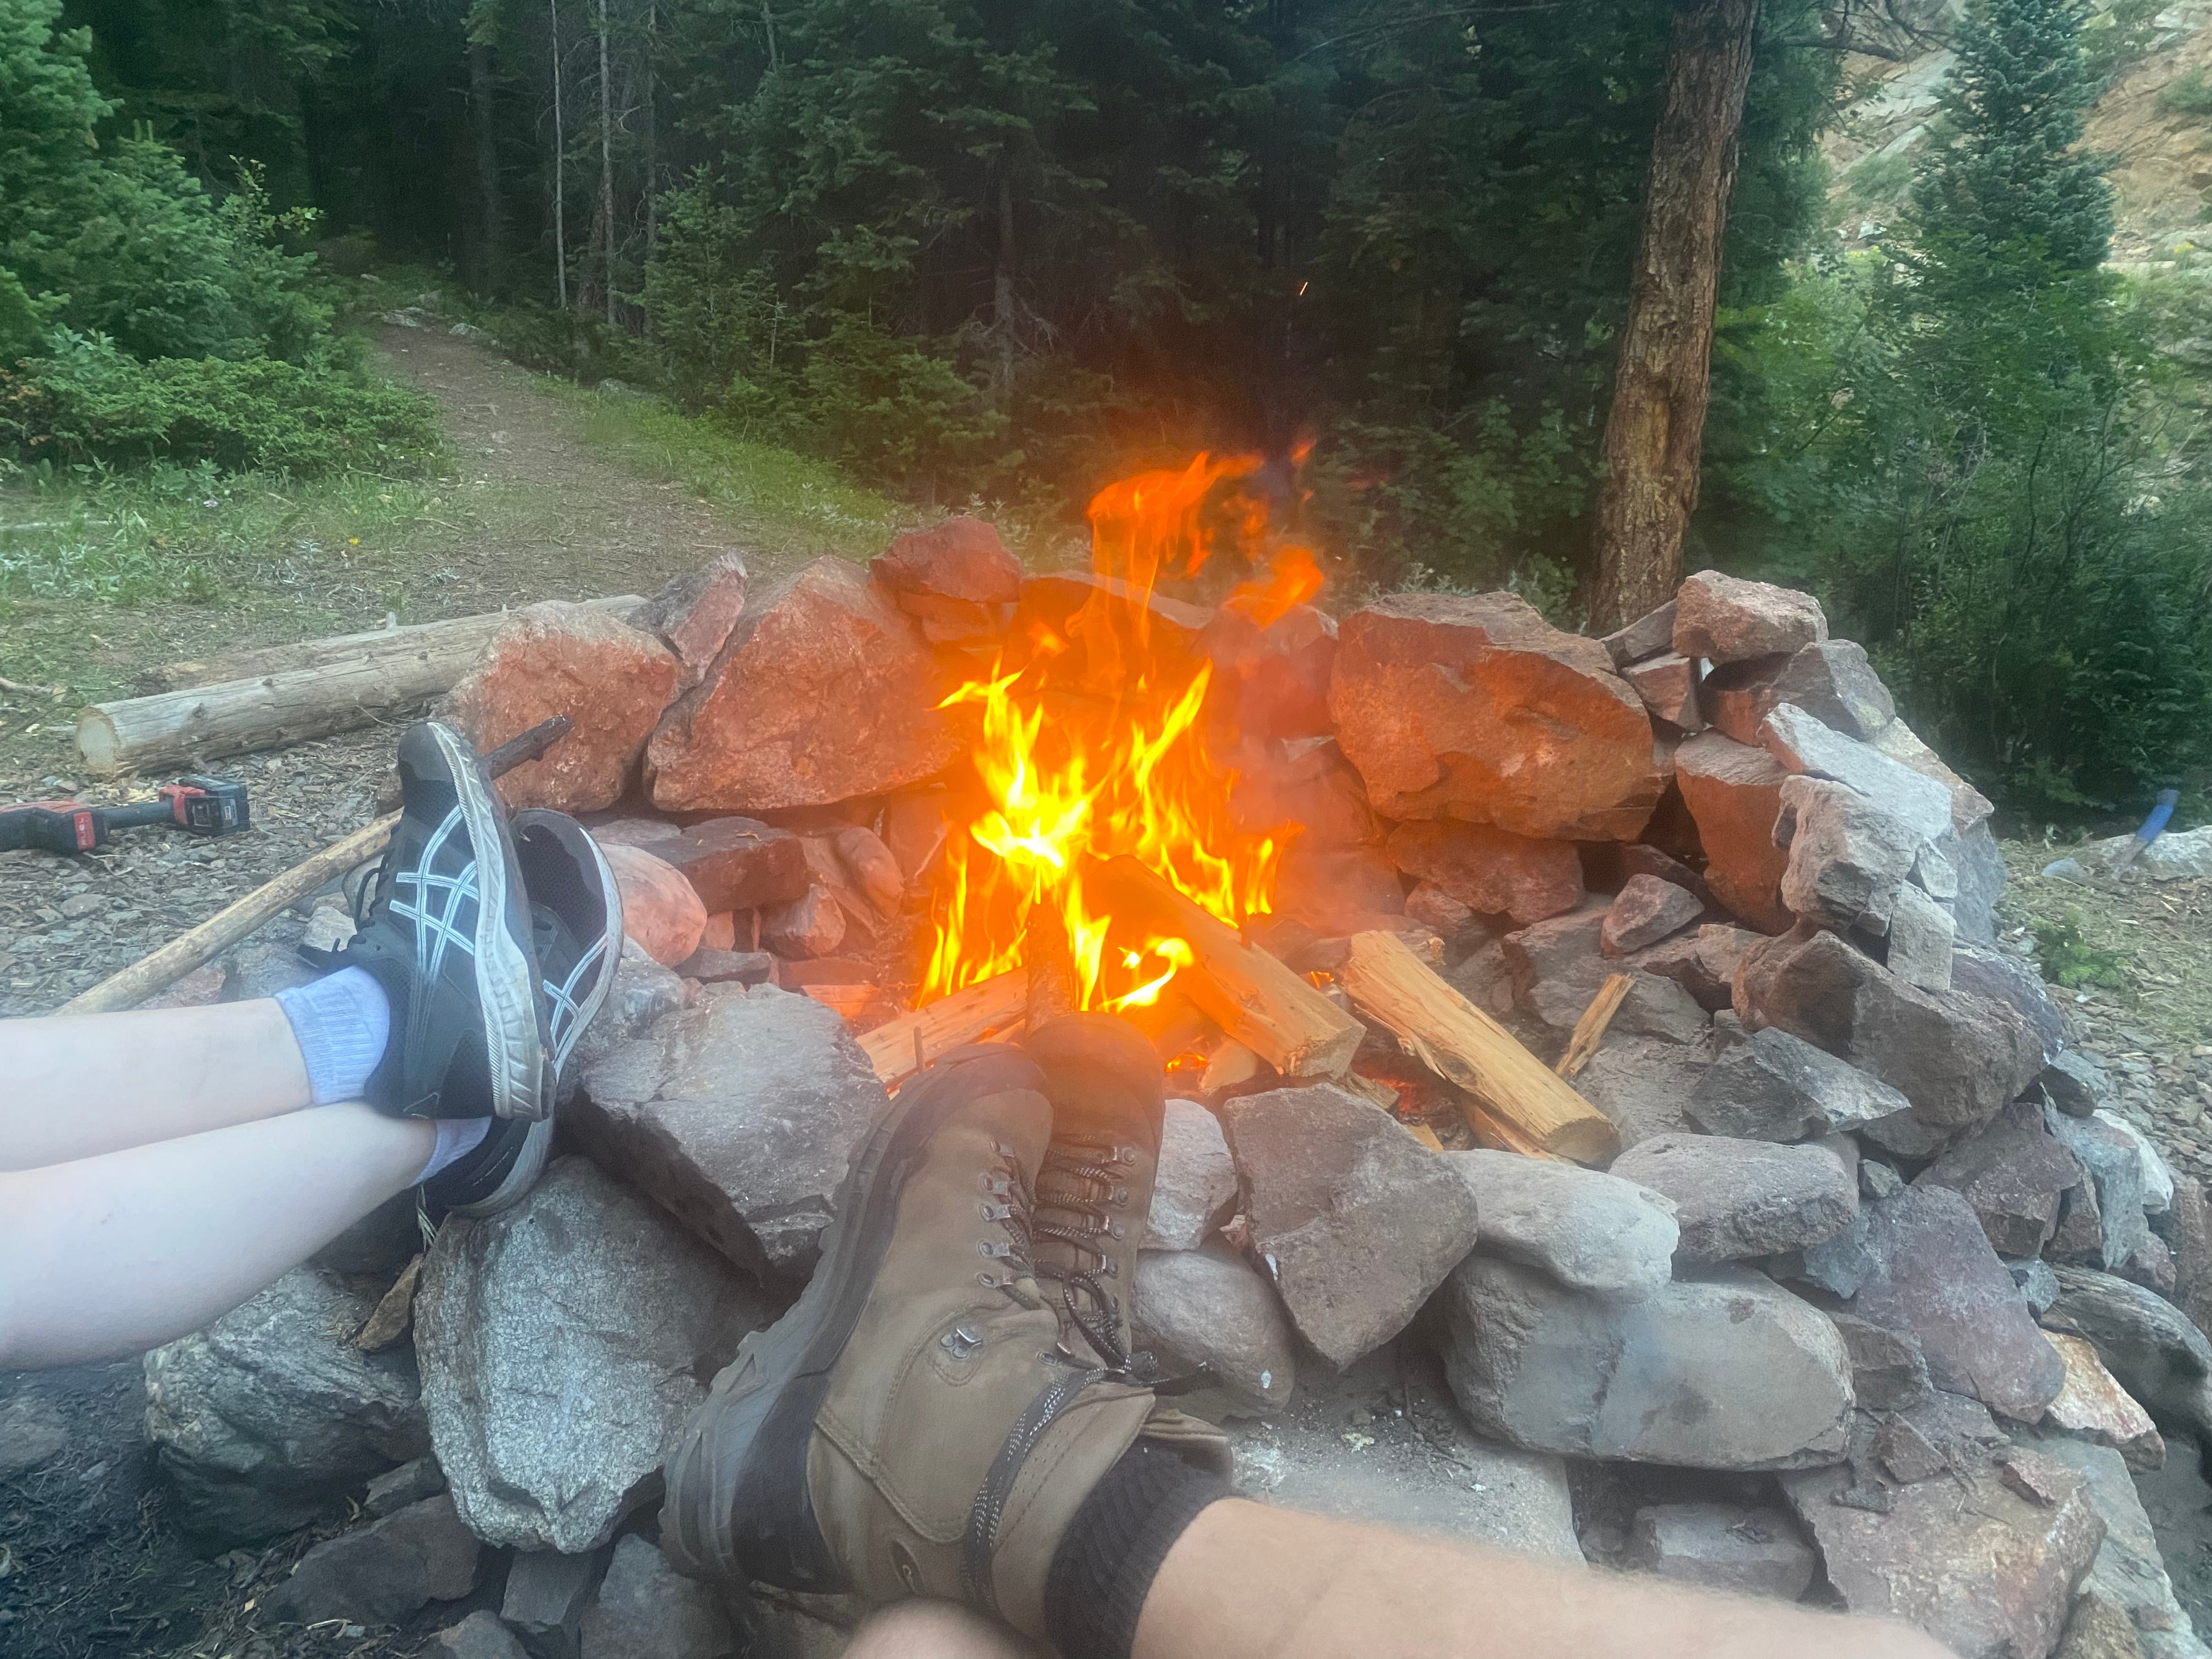 Camper submitted image from Ruby Gulch, Forest Road 328 - 1